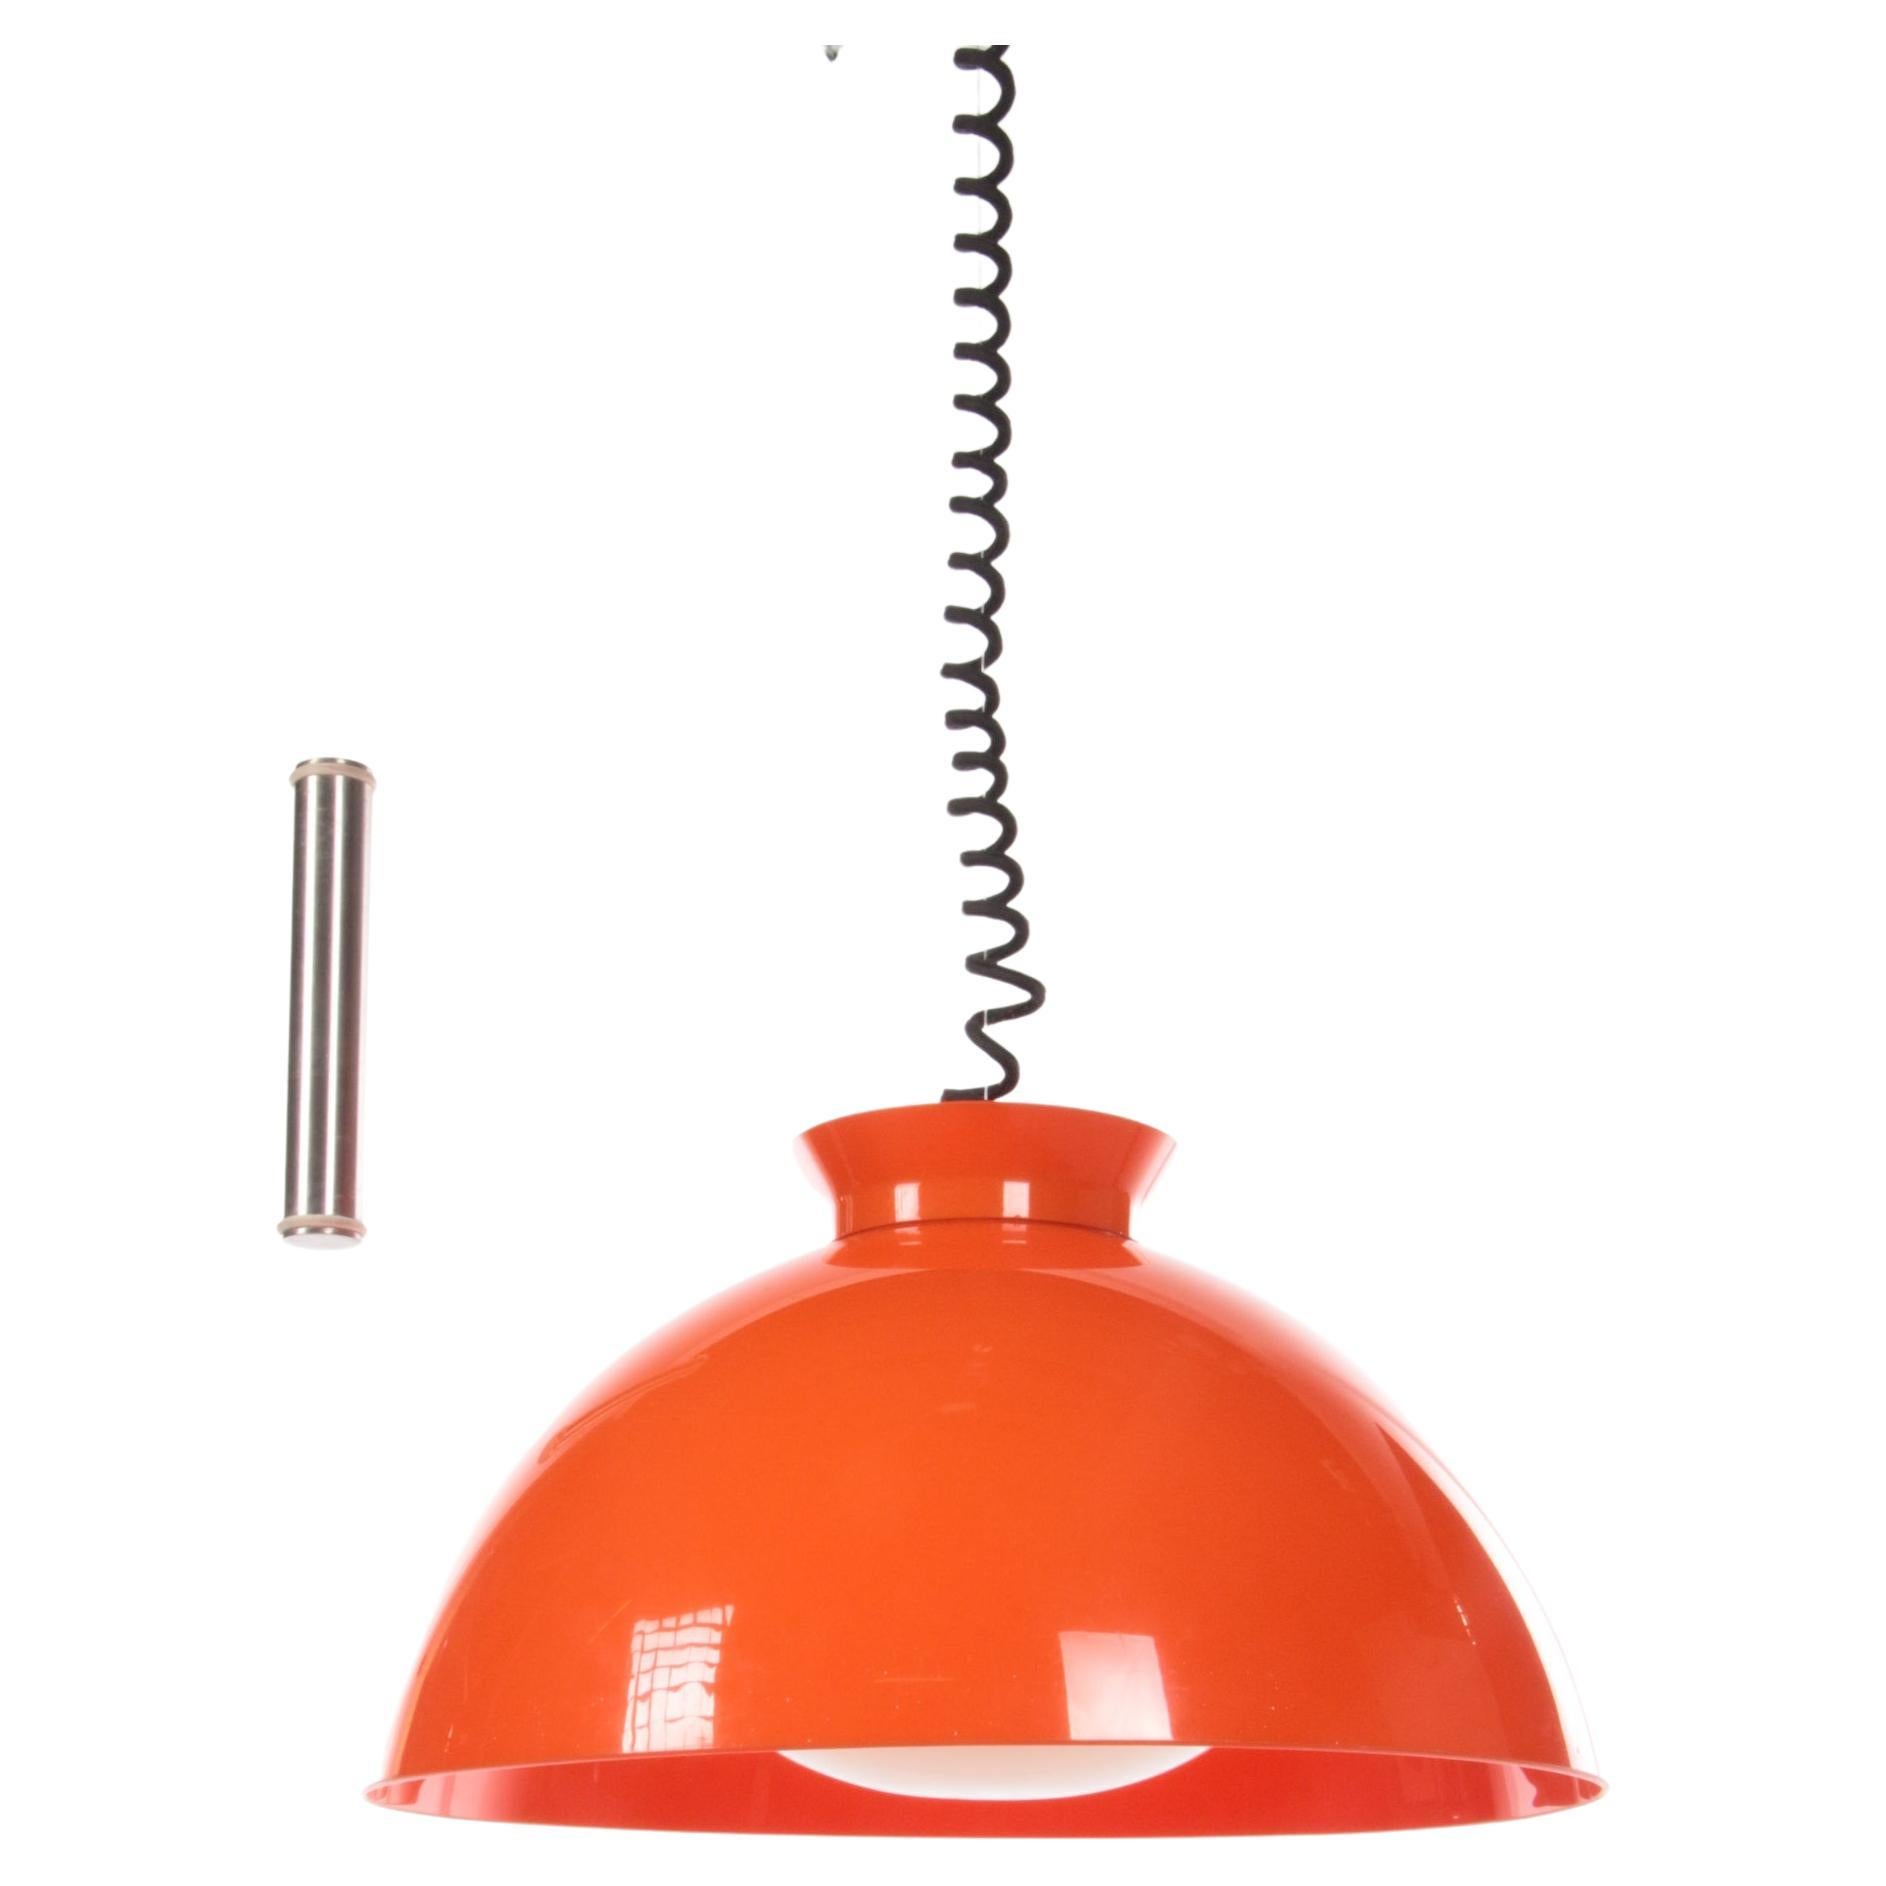 Hanging Lamp Orange Design by Achille & Pier Giacomo by Kartell, 1959 For Sale